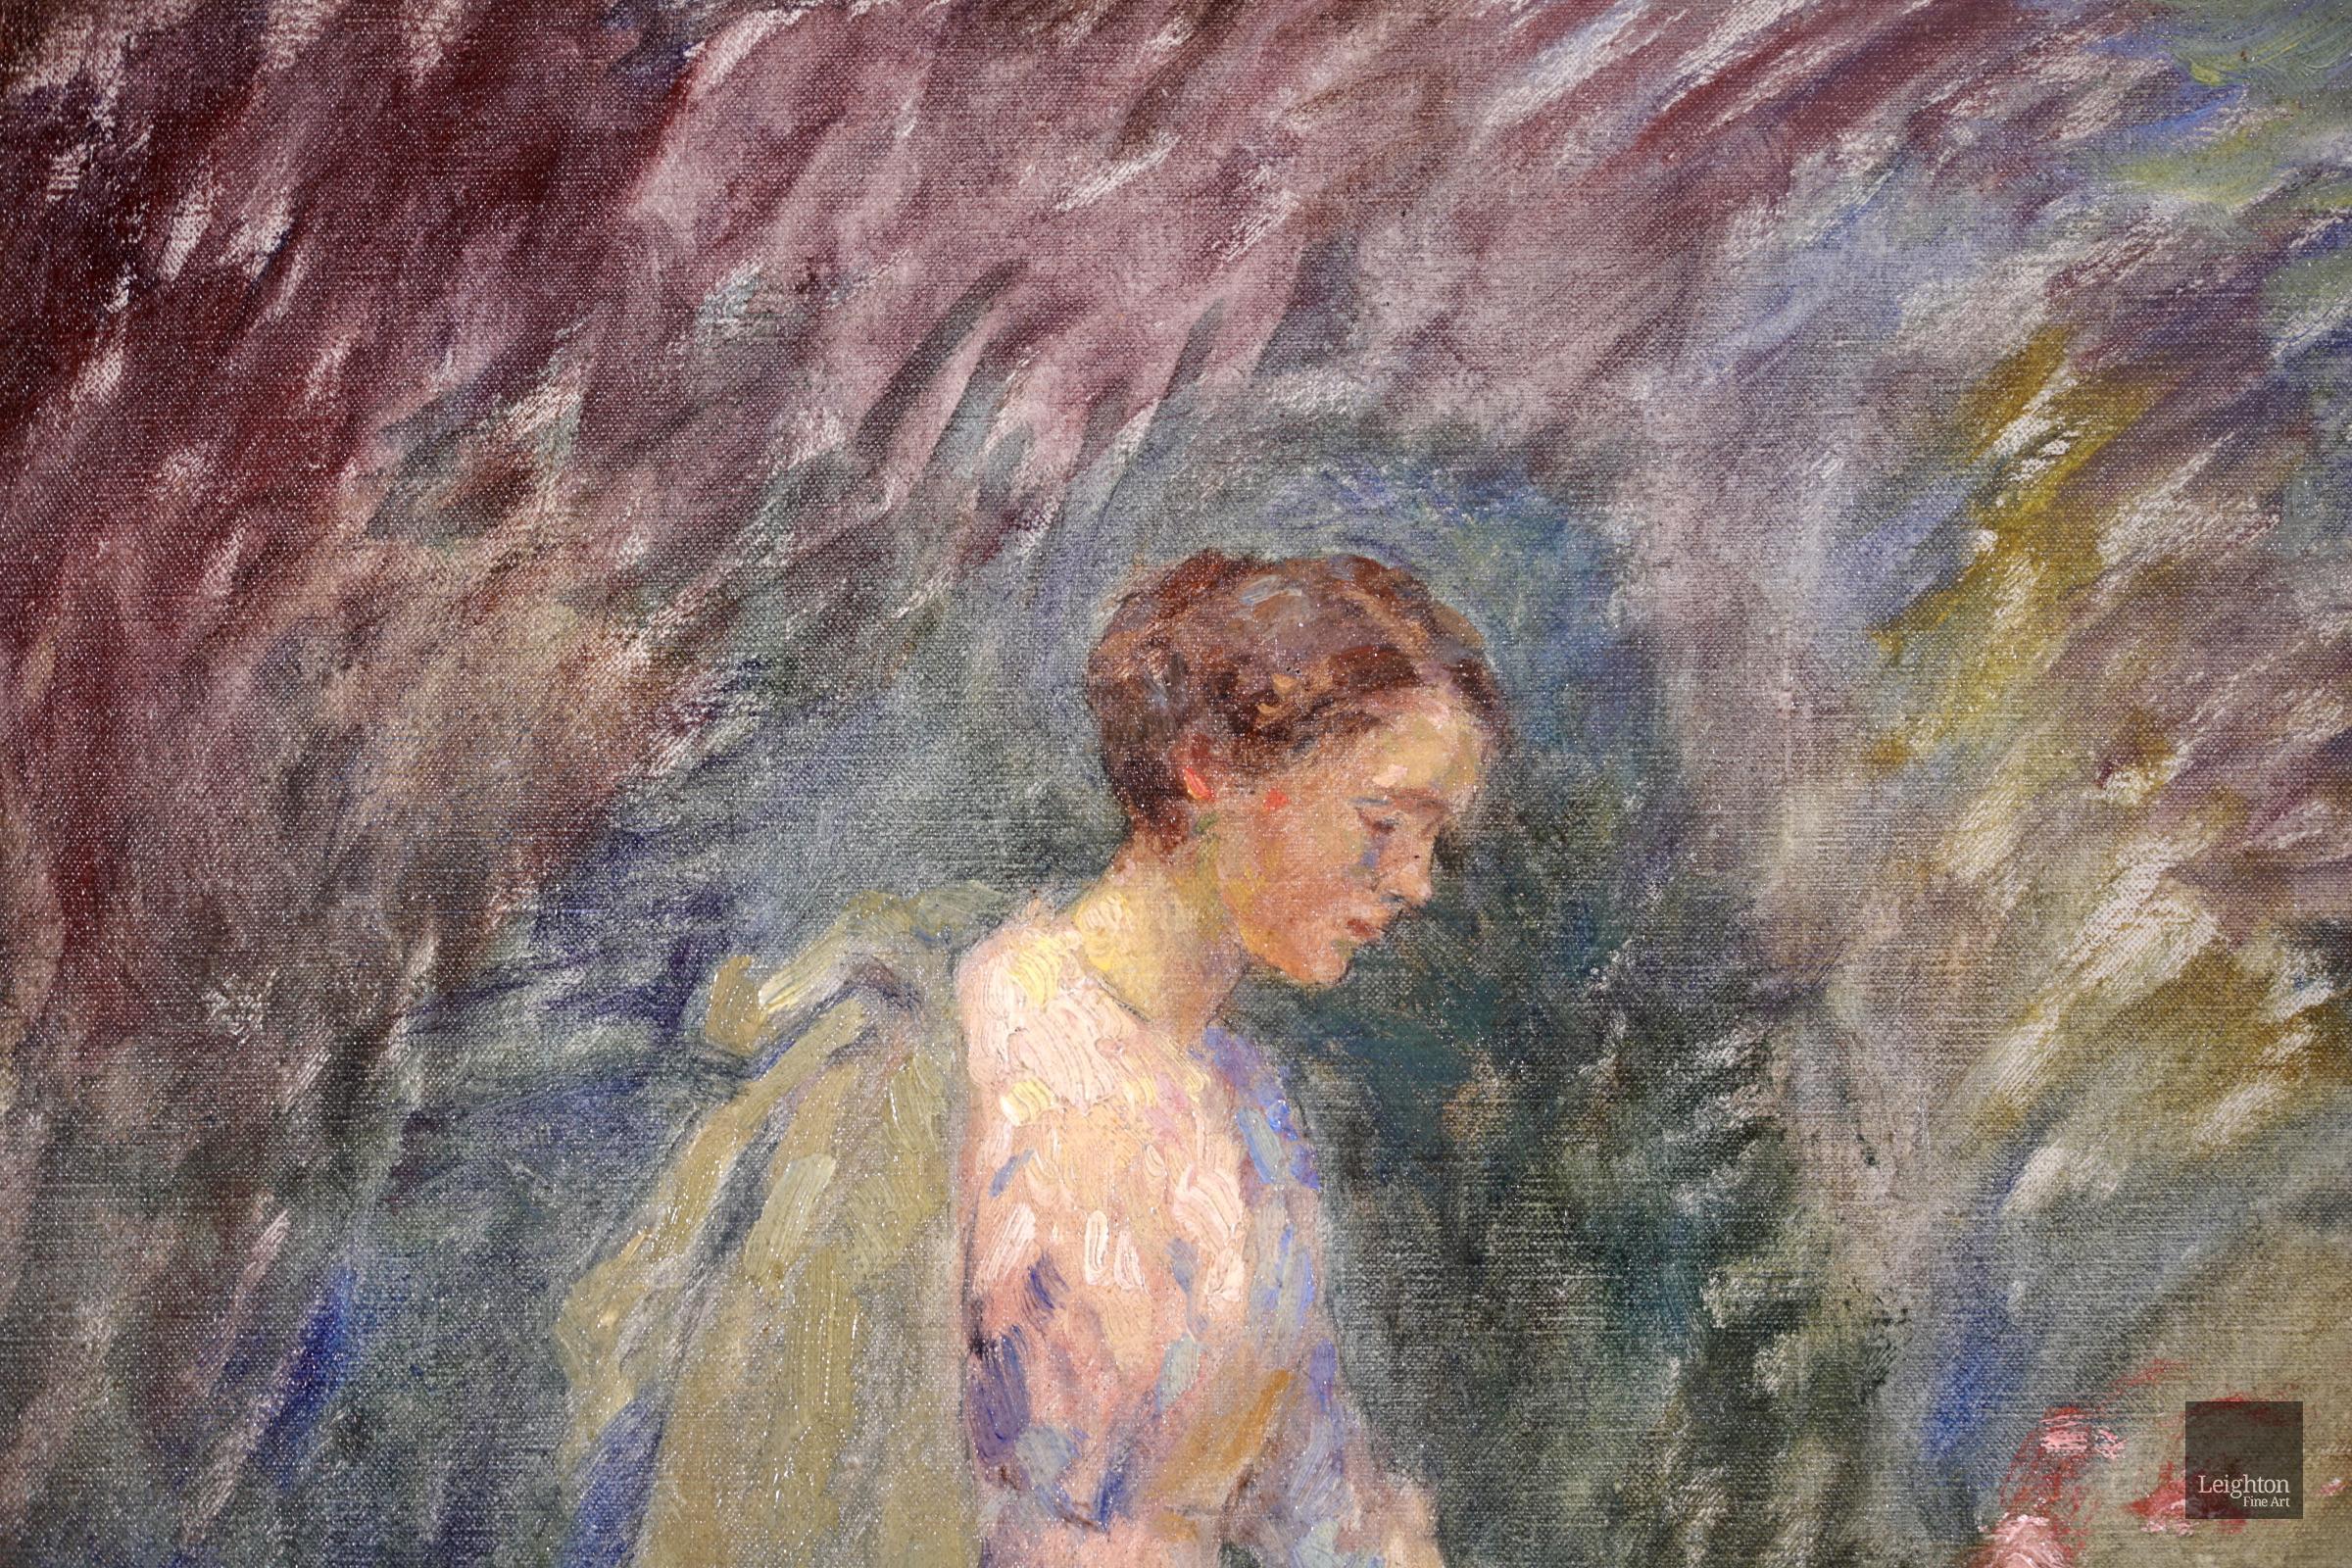 Stunning signed impressionist oil on original canvas dated 1920 by French painter Marie Duhem. The piece depicts a woman in a pale pink dress and a green jacket draped over her shoulders standing beside a young girl in a pink dress who is crouched